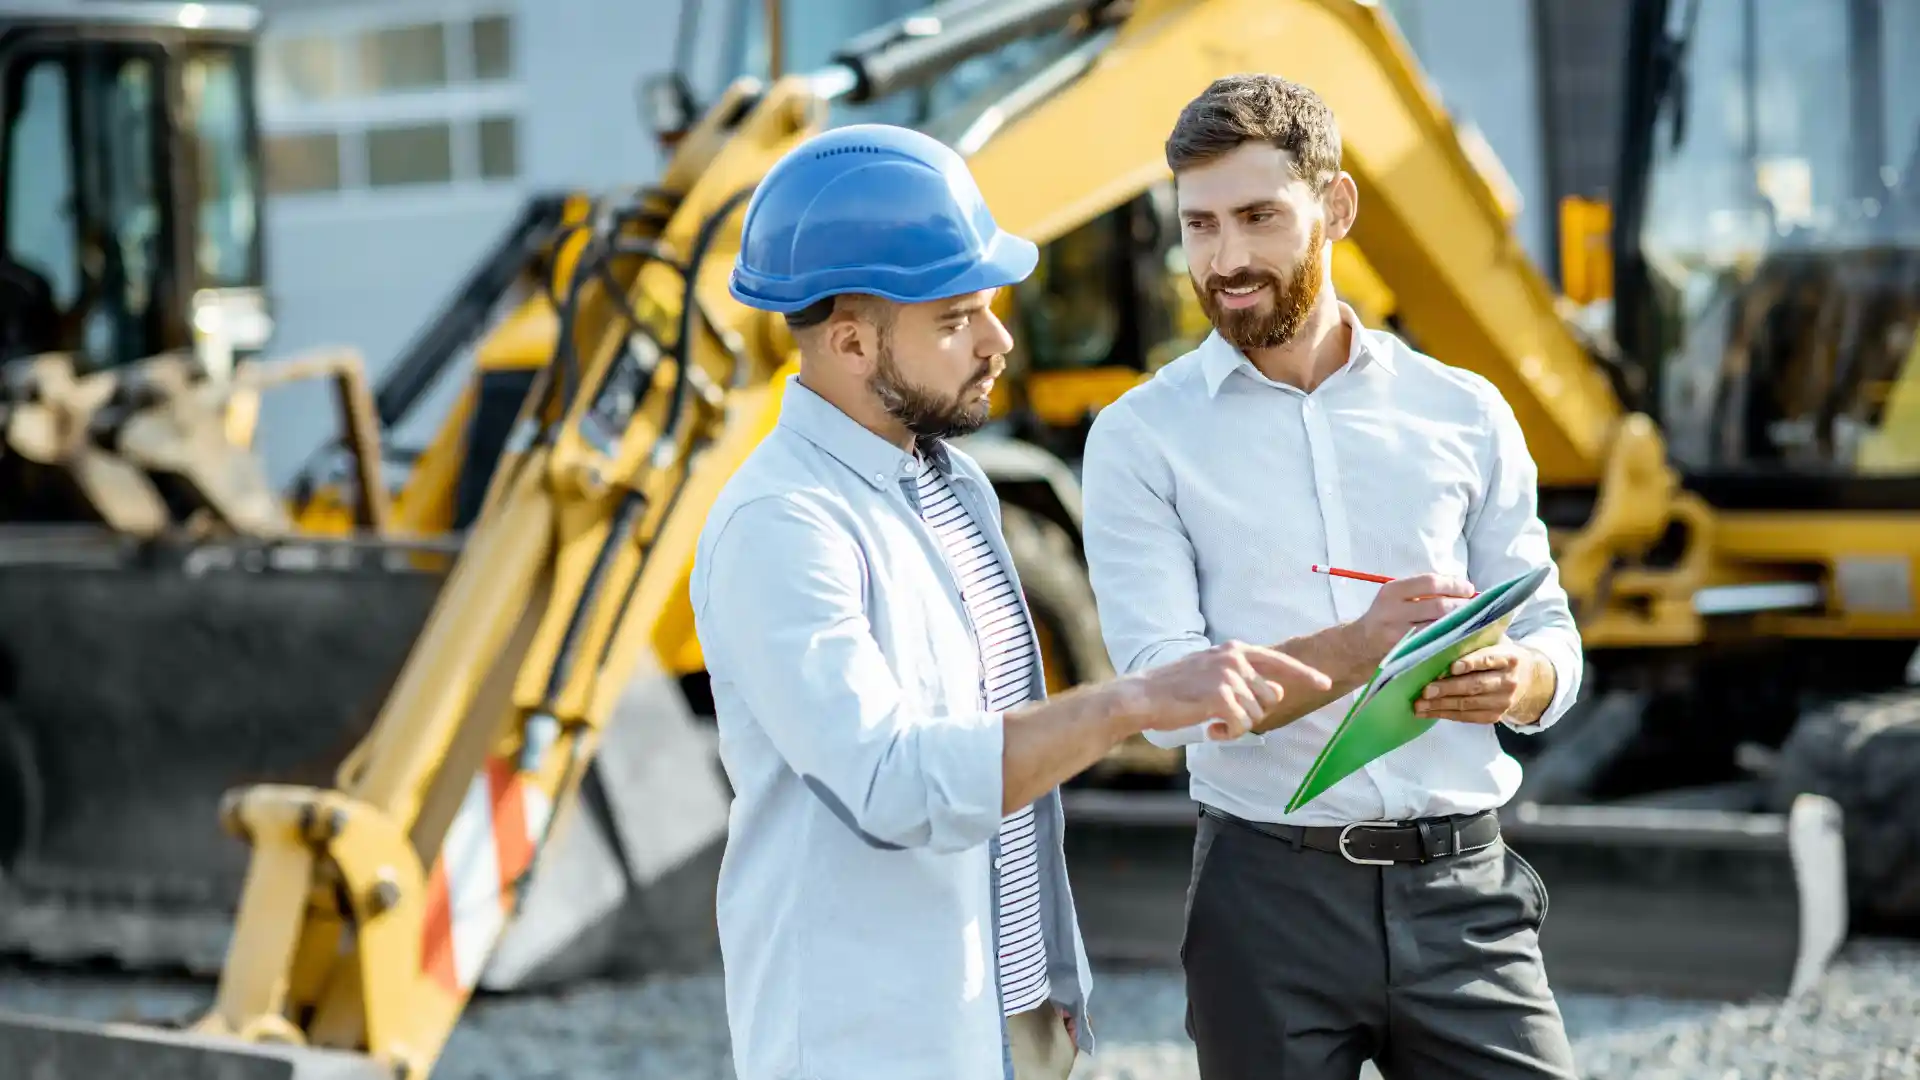 Man wearing helmet talking to other man about machinery details